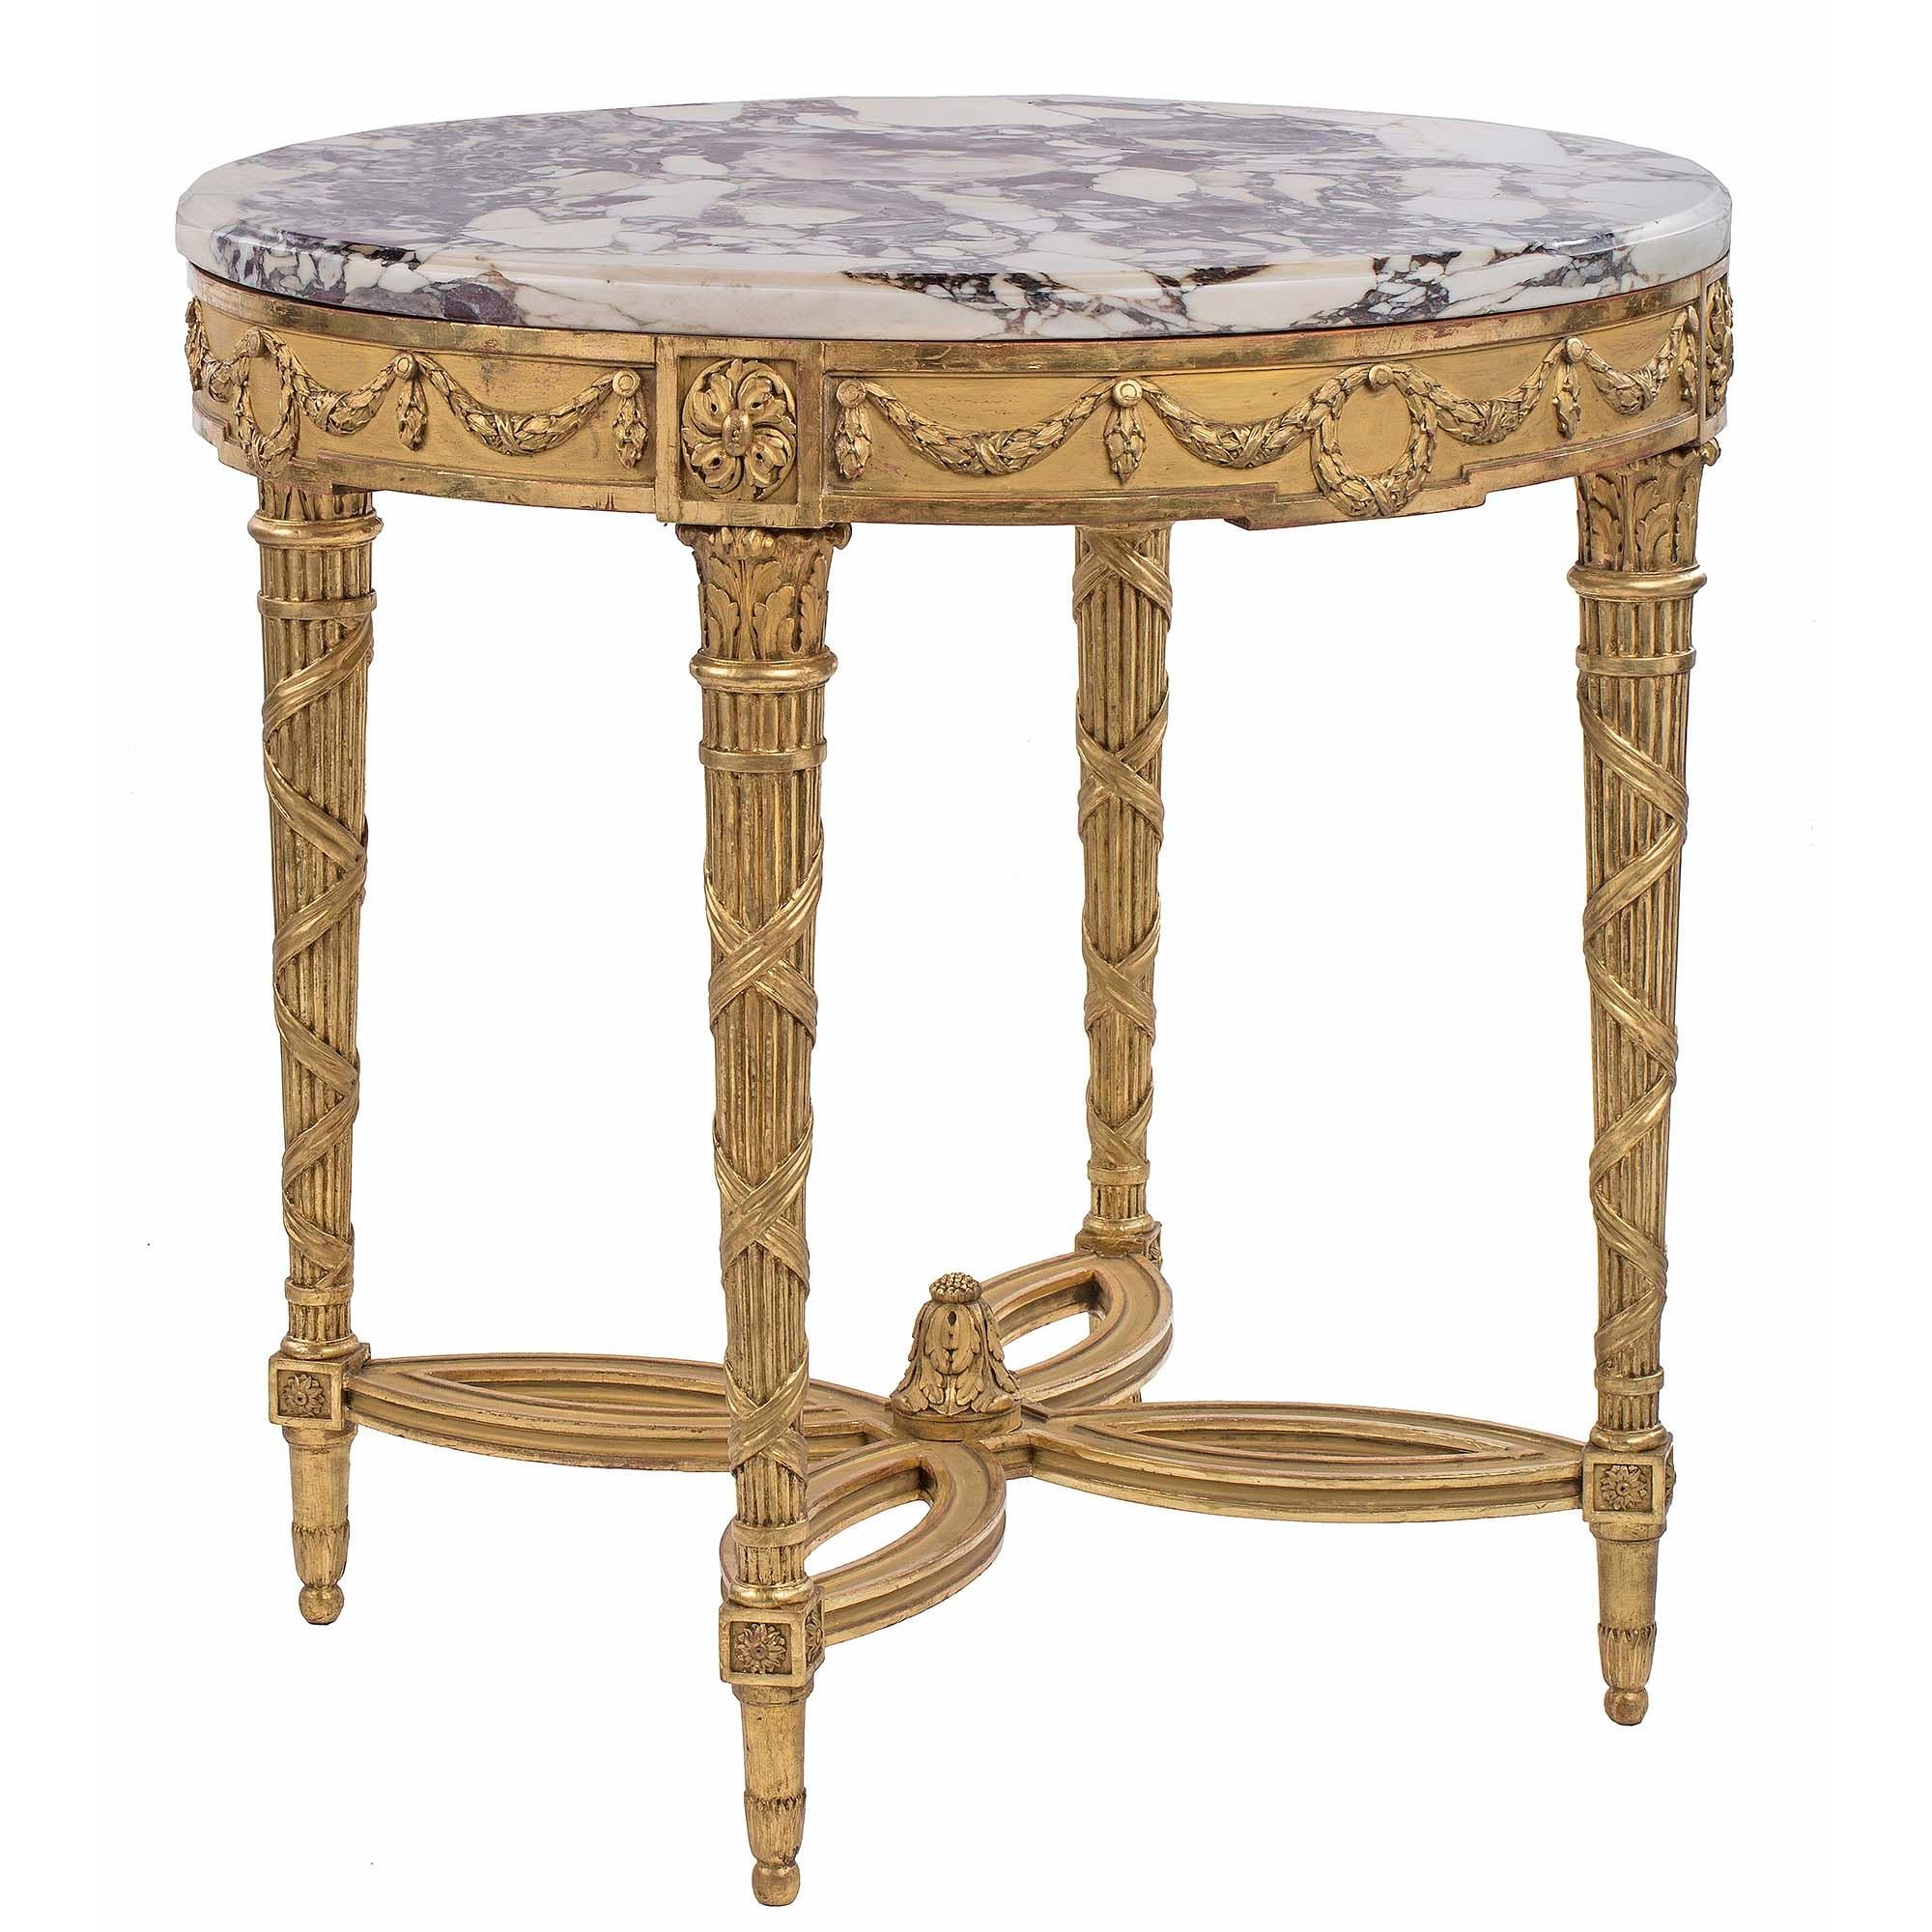 French 19th Century Louis XVI Style Giltwood and Brèche Médicis Centre Table In Good Condition For Sale In West Palm Beach, FL